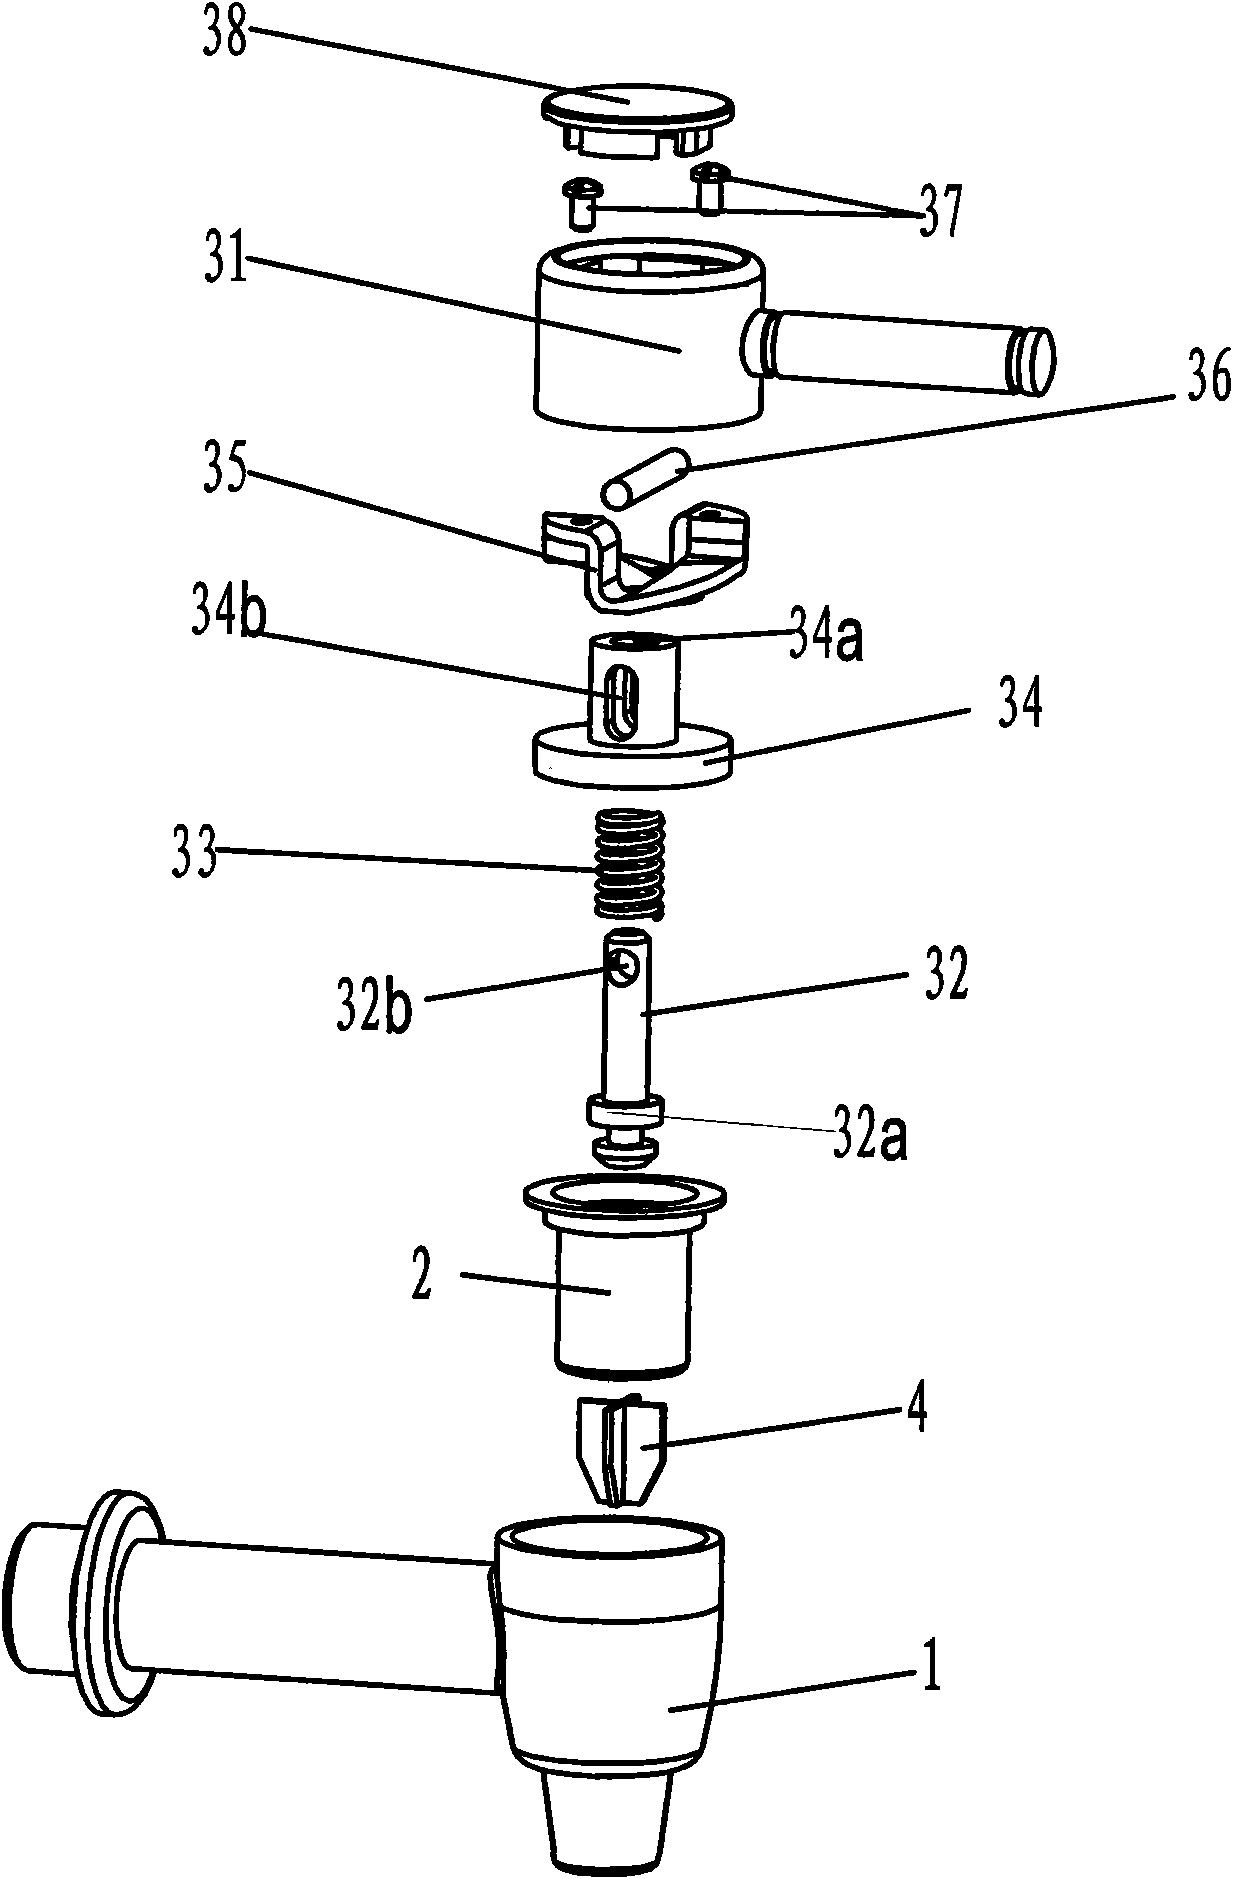 Rotary pulling type water tap